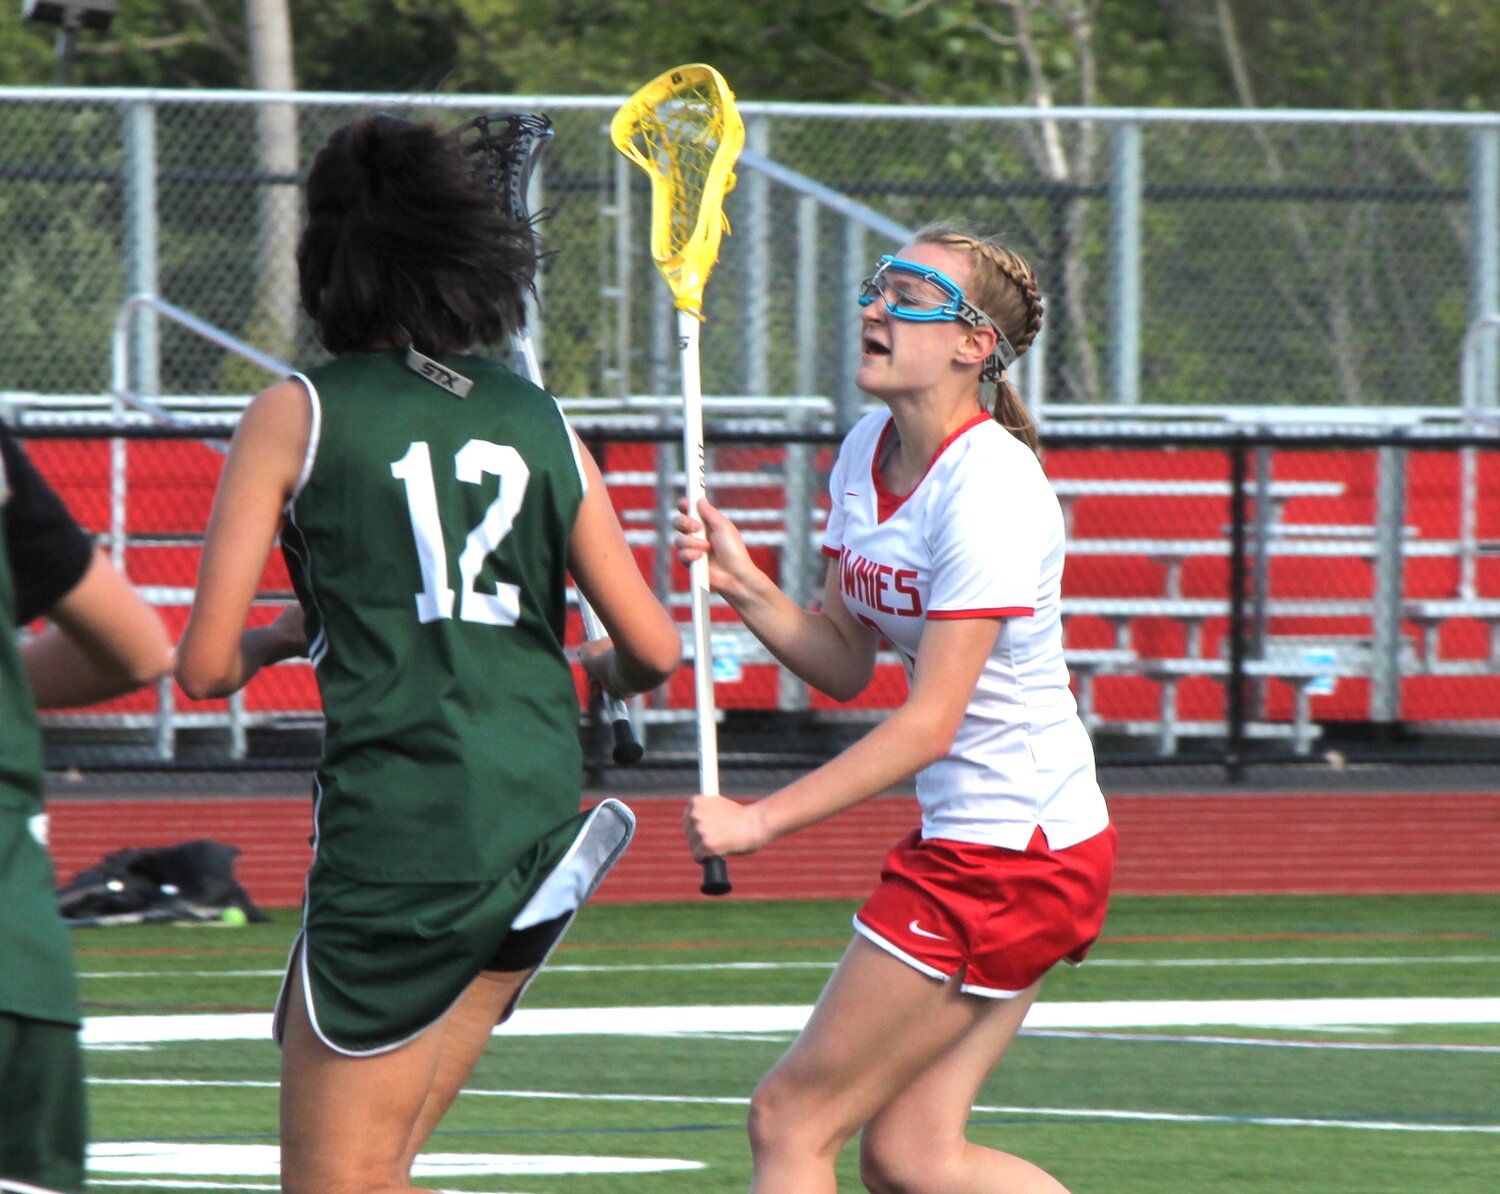 Abigail Leddy scored a goal for the Townies in their win over the 'Bolts.